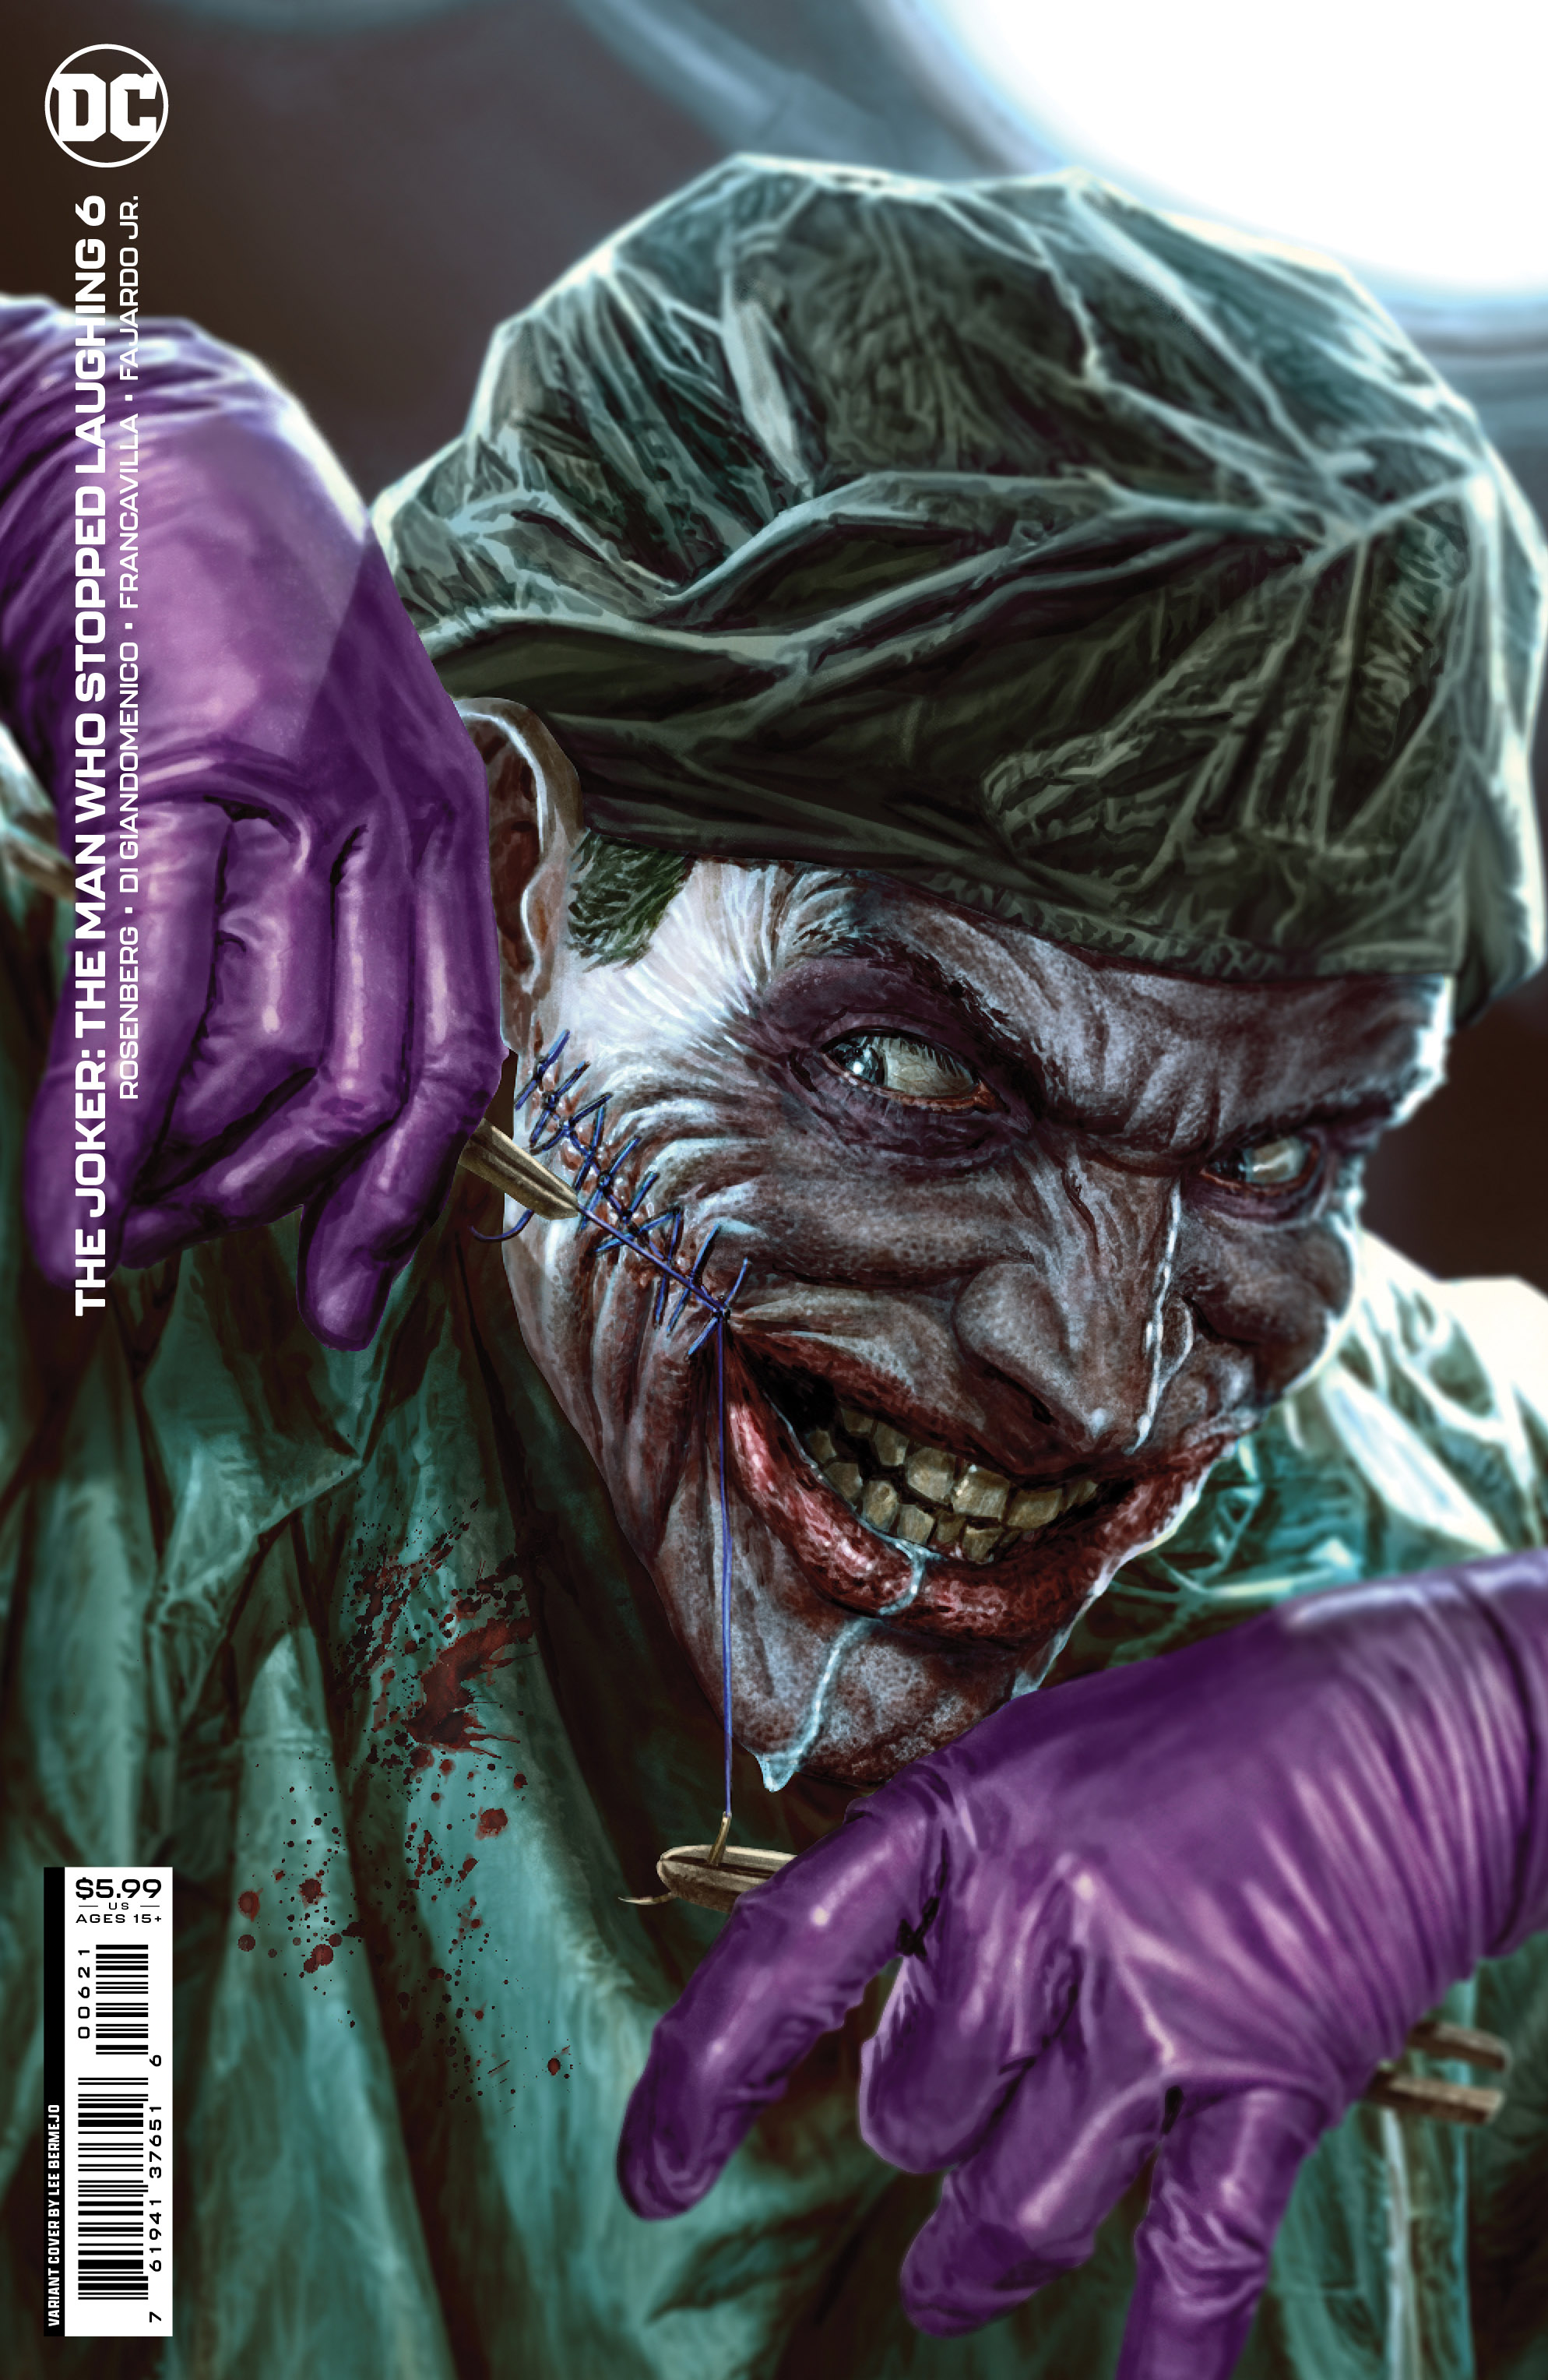 DC: Joker: The Man Who Stopped Laughing #6 (Cover B Lee Bermejo Variant)  from Joker: The Man Who Stopped Laughing by Matthew Rosenberg published by  DC Comics @  - UK and